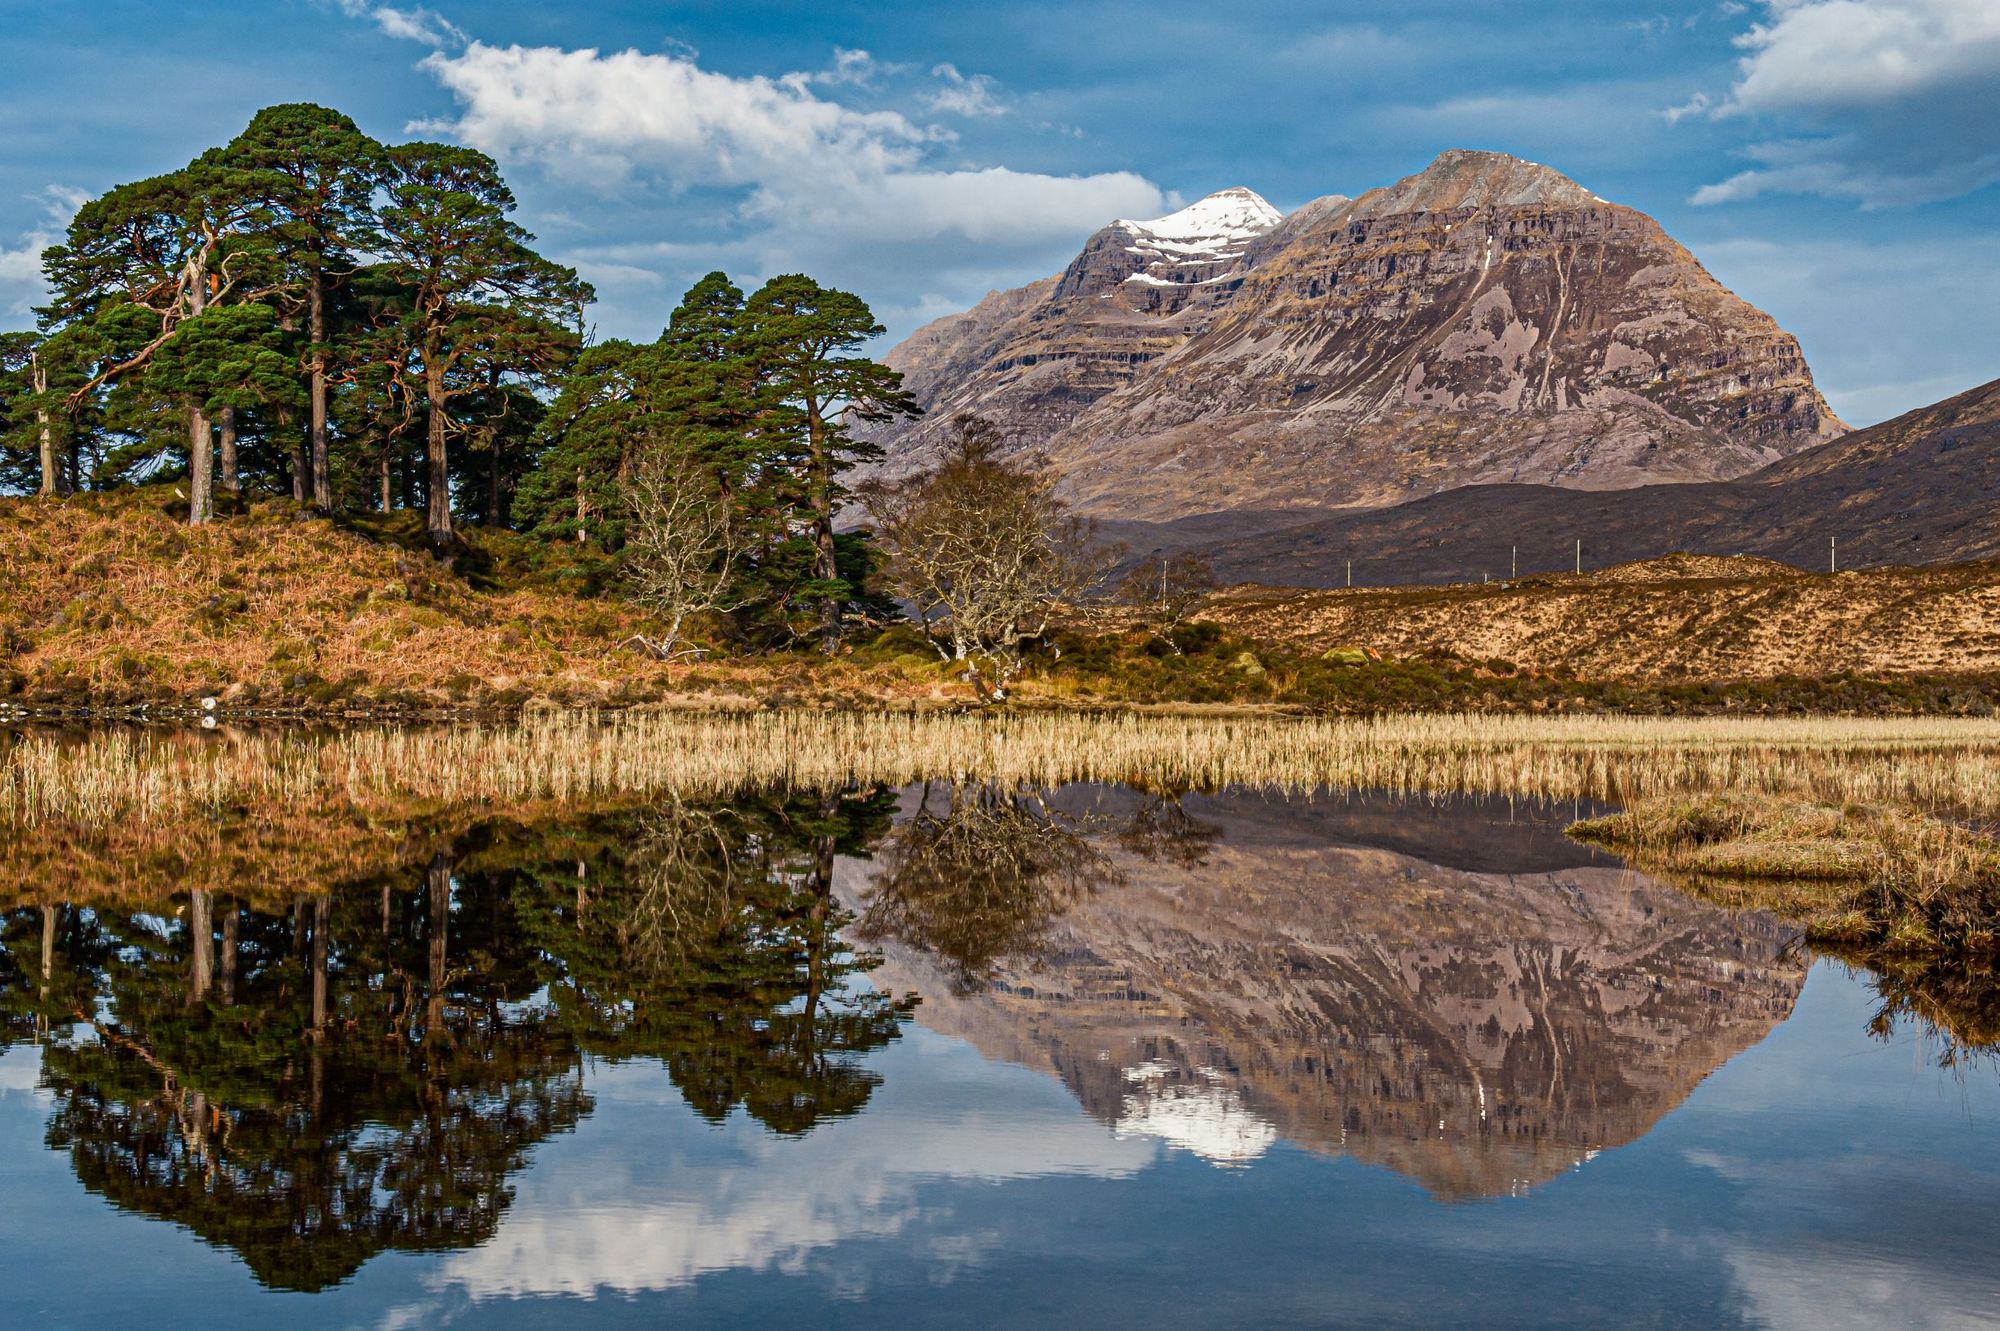 A panorama of Loch Clair with the views of Liathach from across the water, in Glen Torridon. Photo: Getty